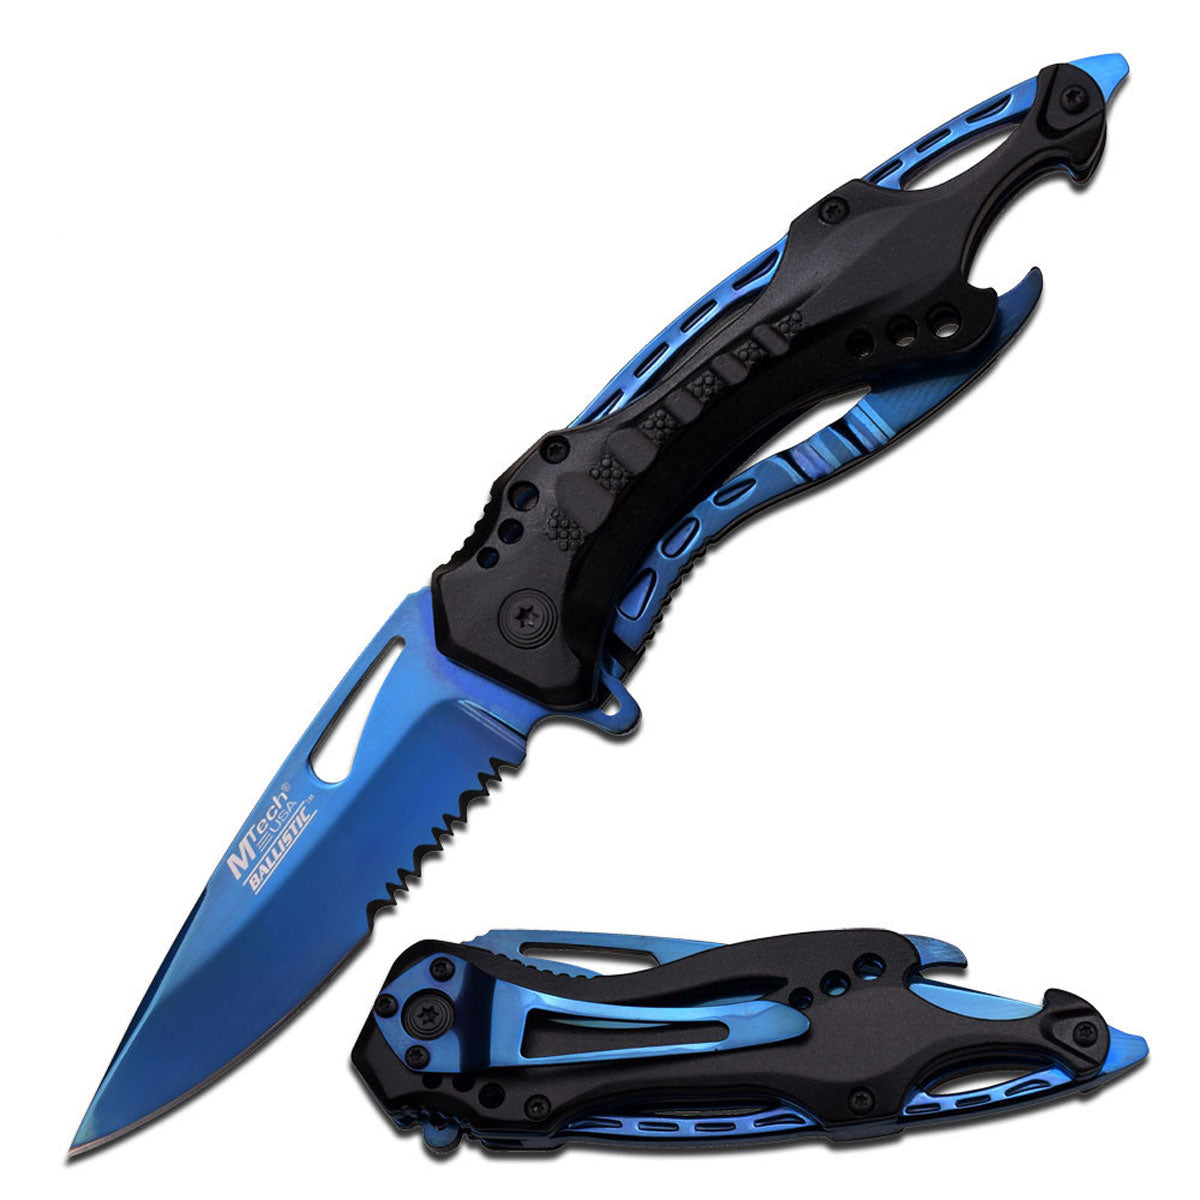 GIFTS INFINITY 4.5" Closed Personalized Engraved Folding Pocket Knife, Blue Sharp Stainless Steel Blade With Black Aluminum Handle